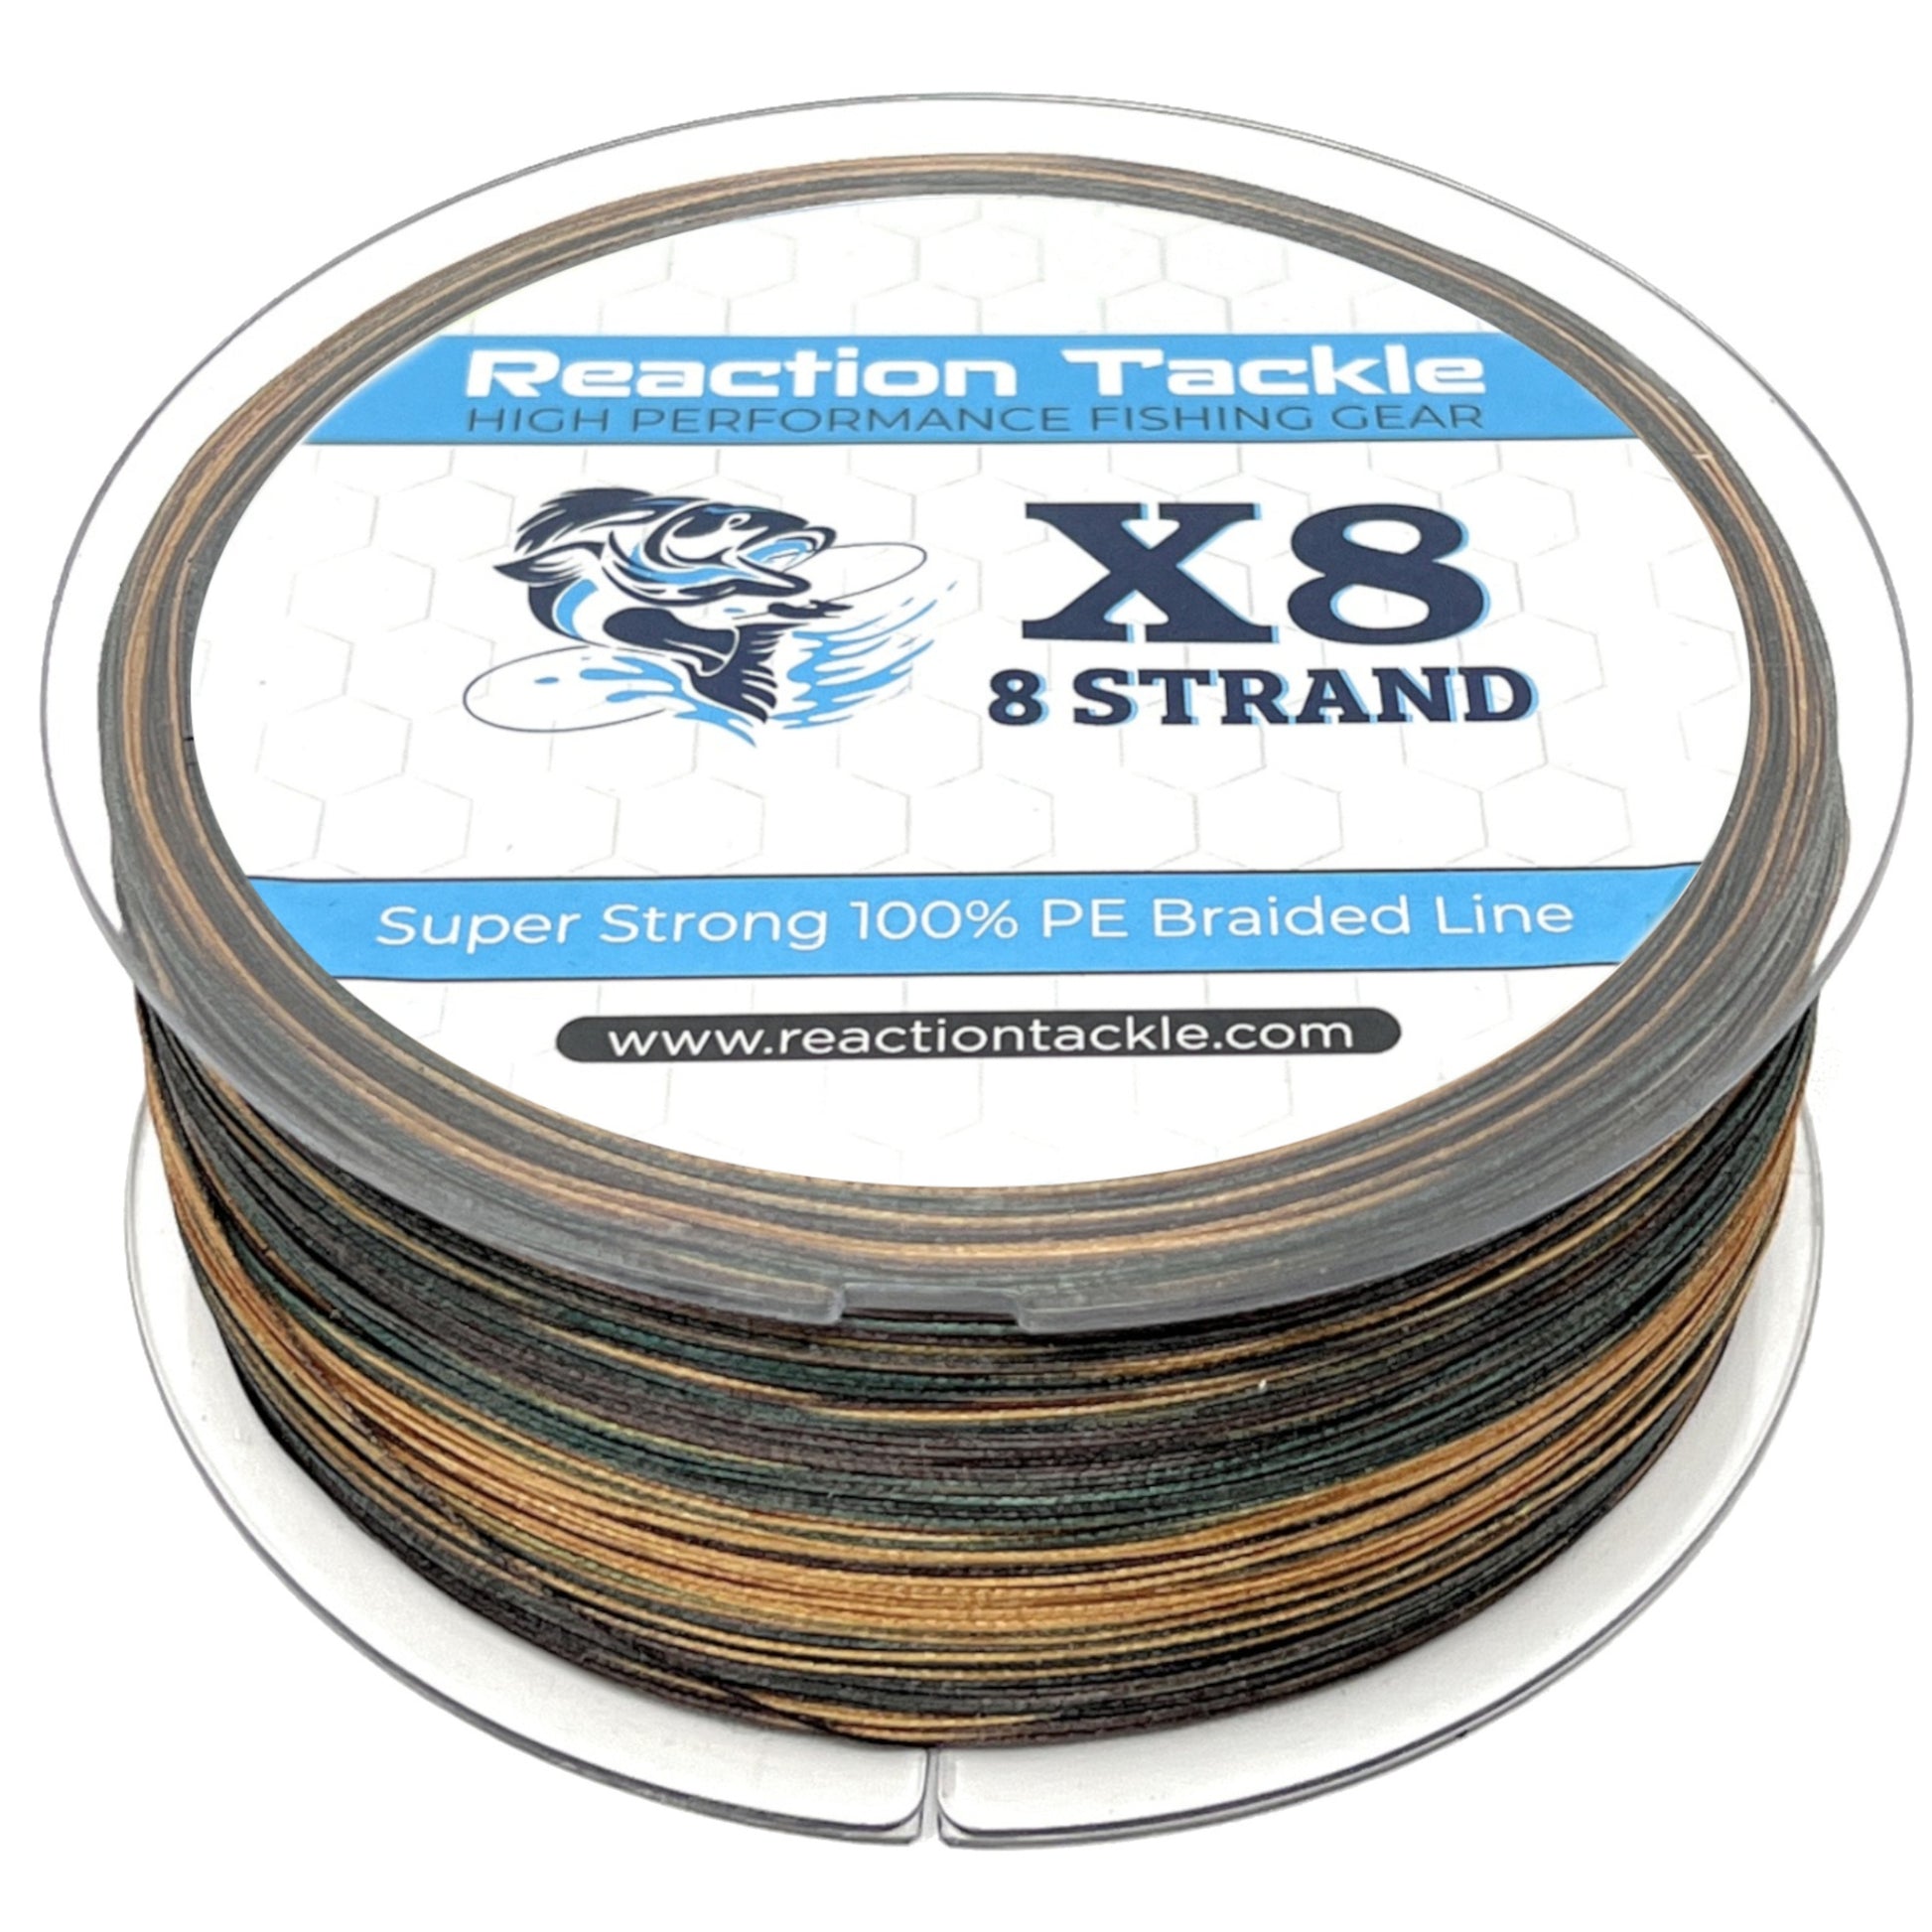 Best Braided Fishing Lines UK: Comparing every braid